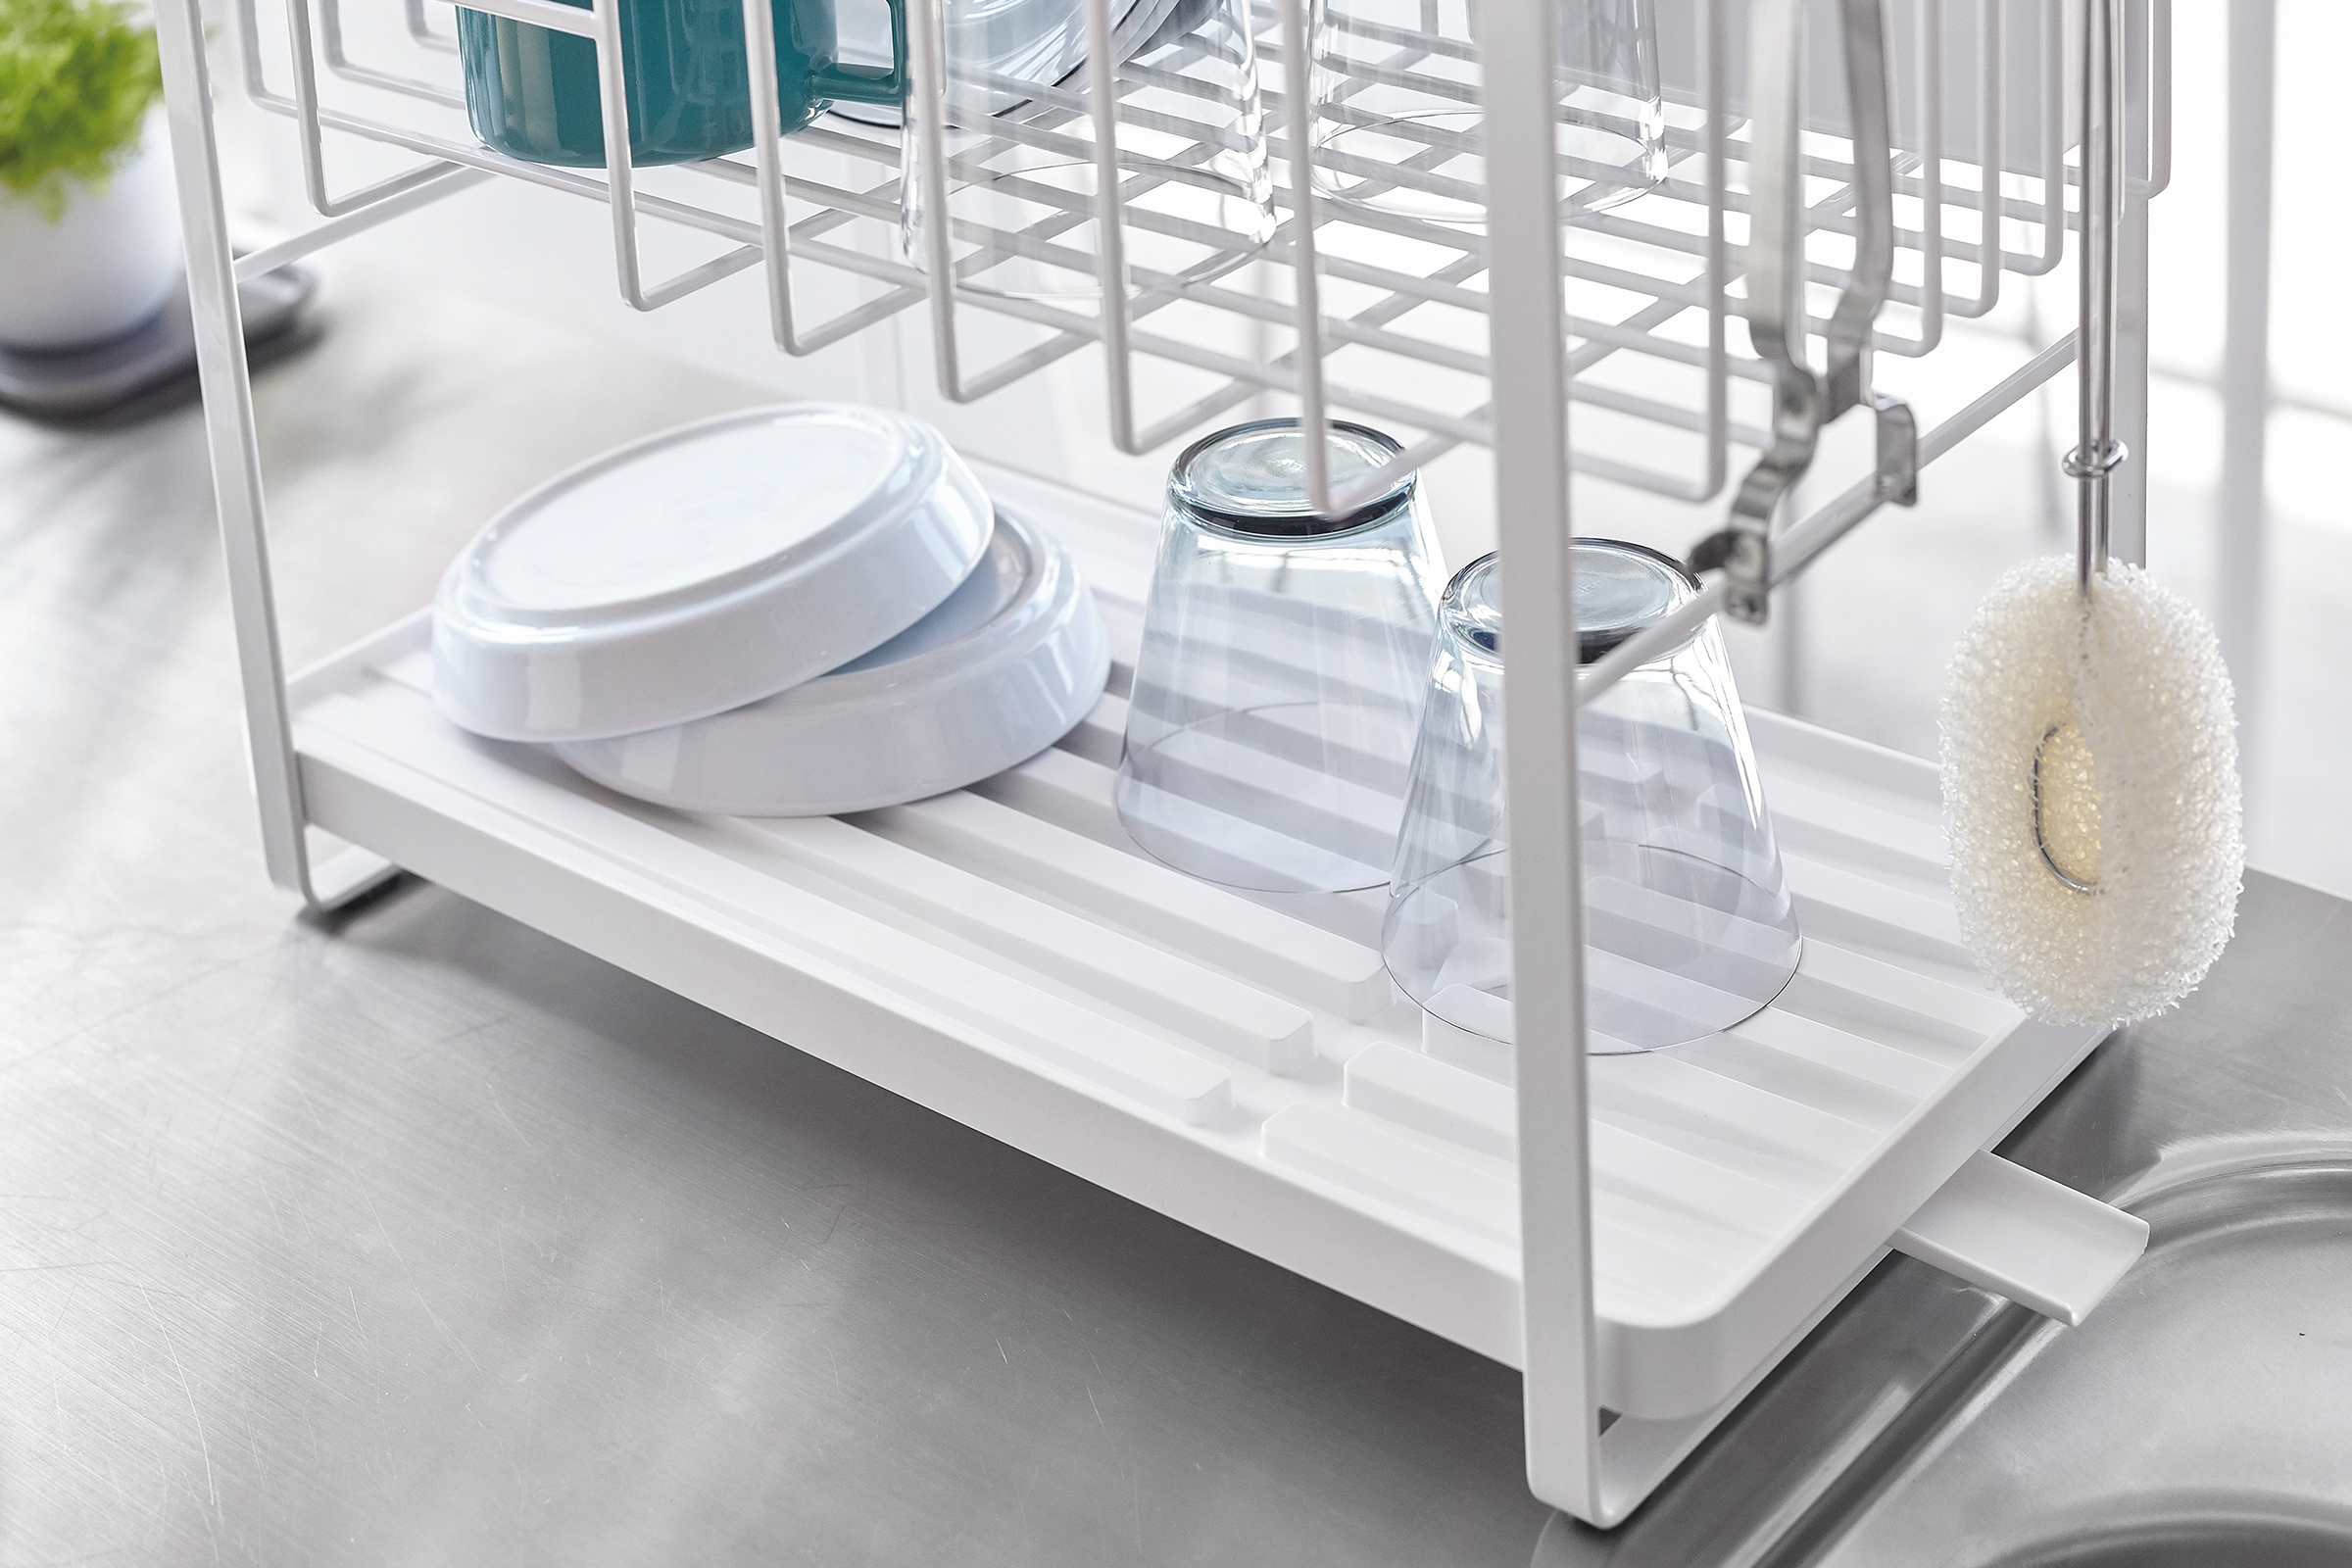 White Two-Tier Customizable Dish Rack holding bowls and cups on kitchen sink countertop by Yamazaki Home.

